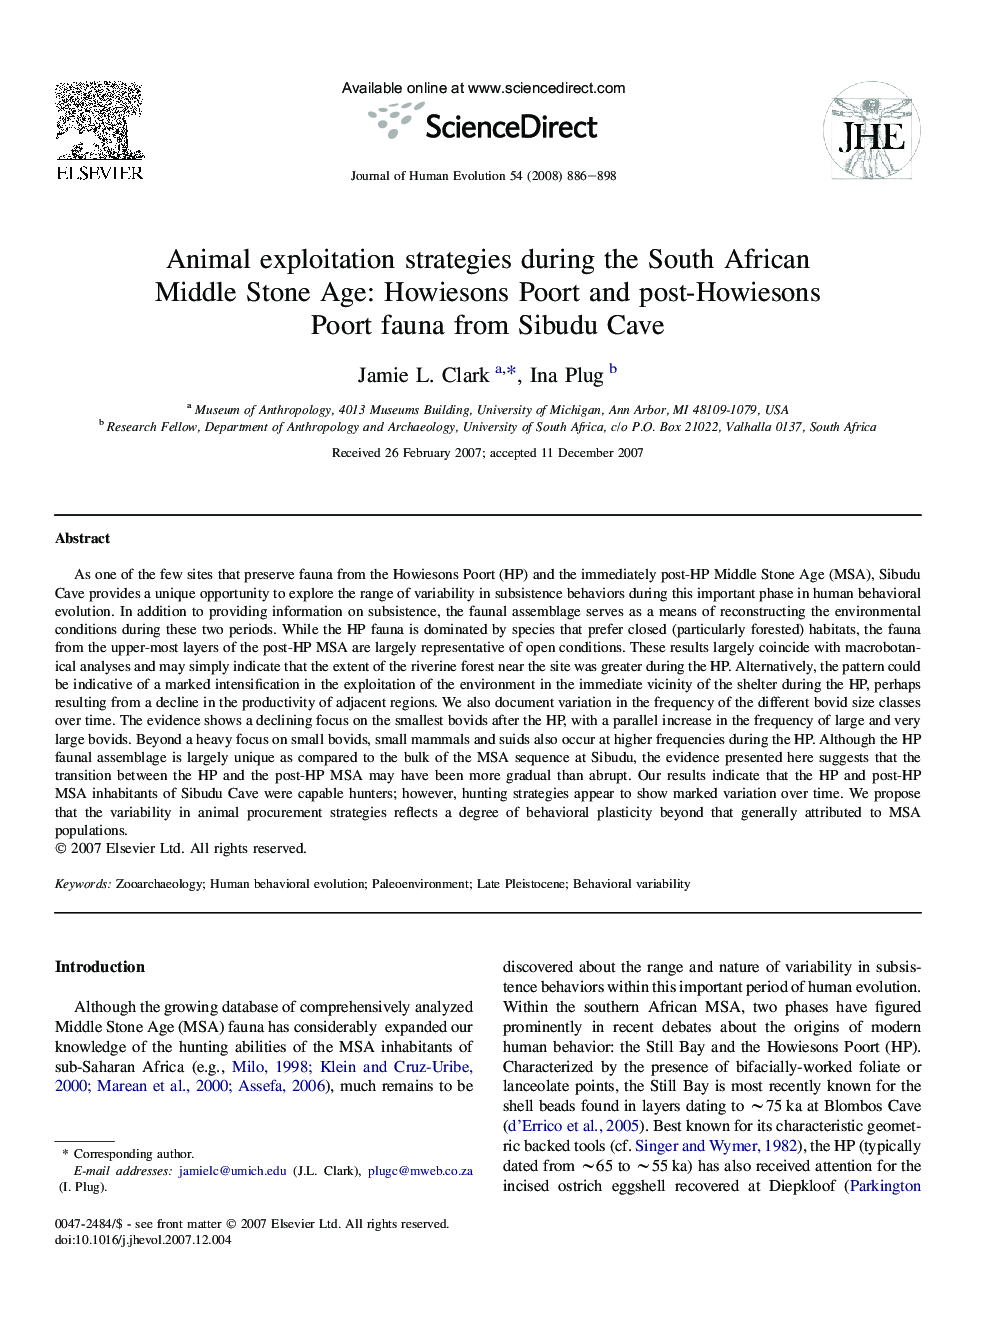 Animal exploitation strategies during the South African Middle Stone Age: Howiesons Poort and post-Howiesons Poort fauna from Sibudu Cave